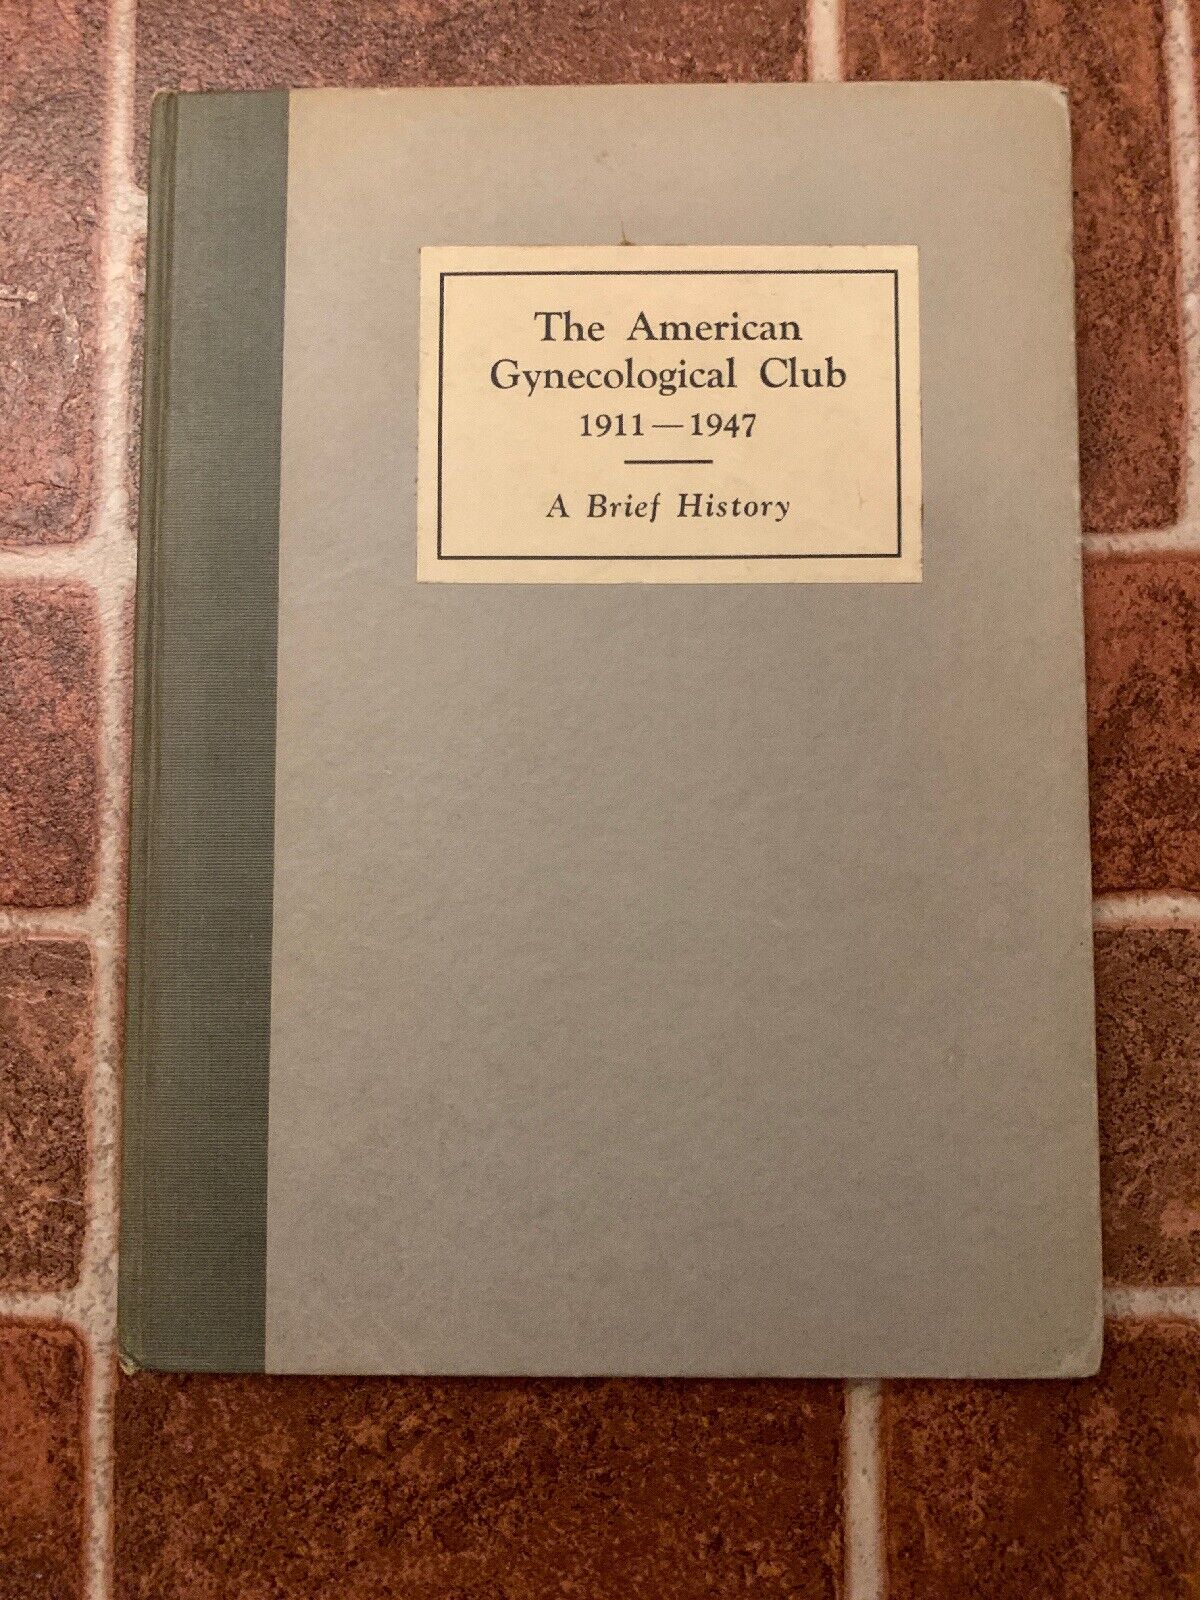 The American Gynecological Club 1911-1947 A Brief History Signed 